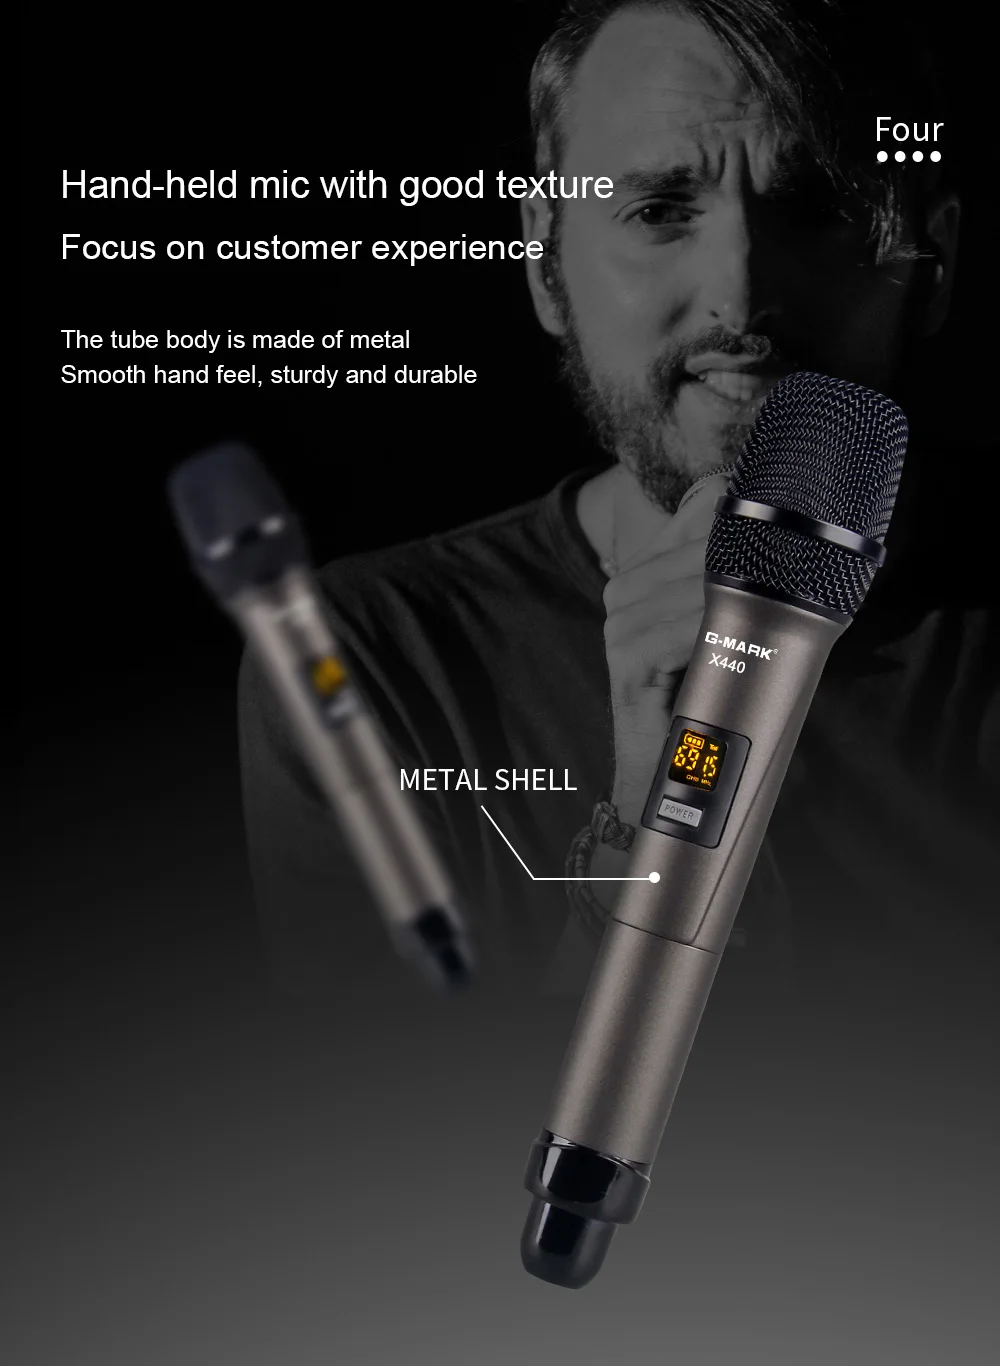 G-MARK X440 Professional Wireless Microphone 4 Channels Karaoke Handheld Metal Body Chargeable Easy Use Outdoor With Suitcase